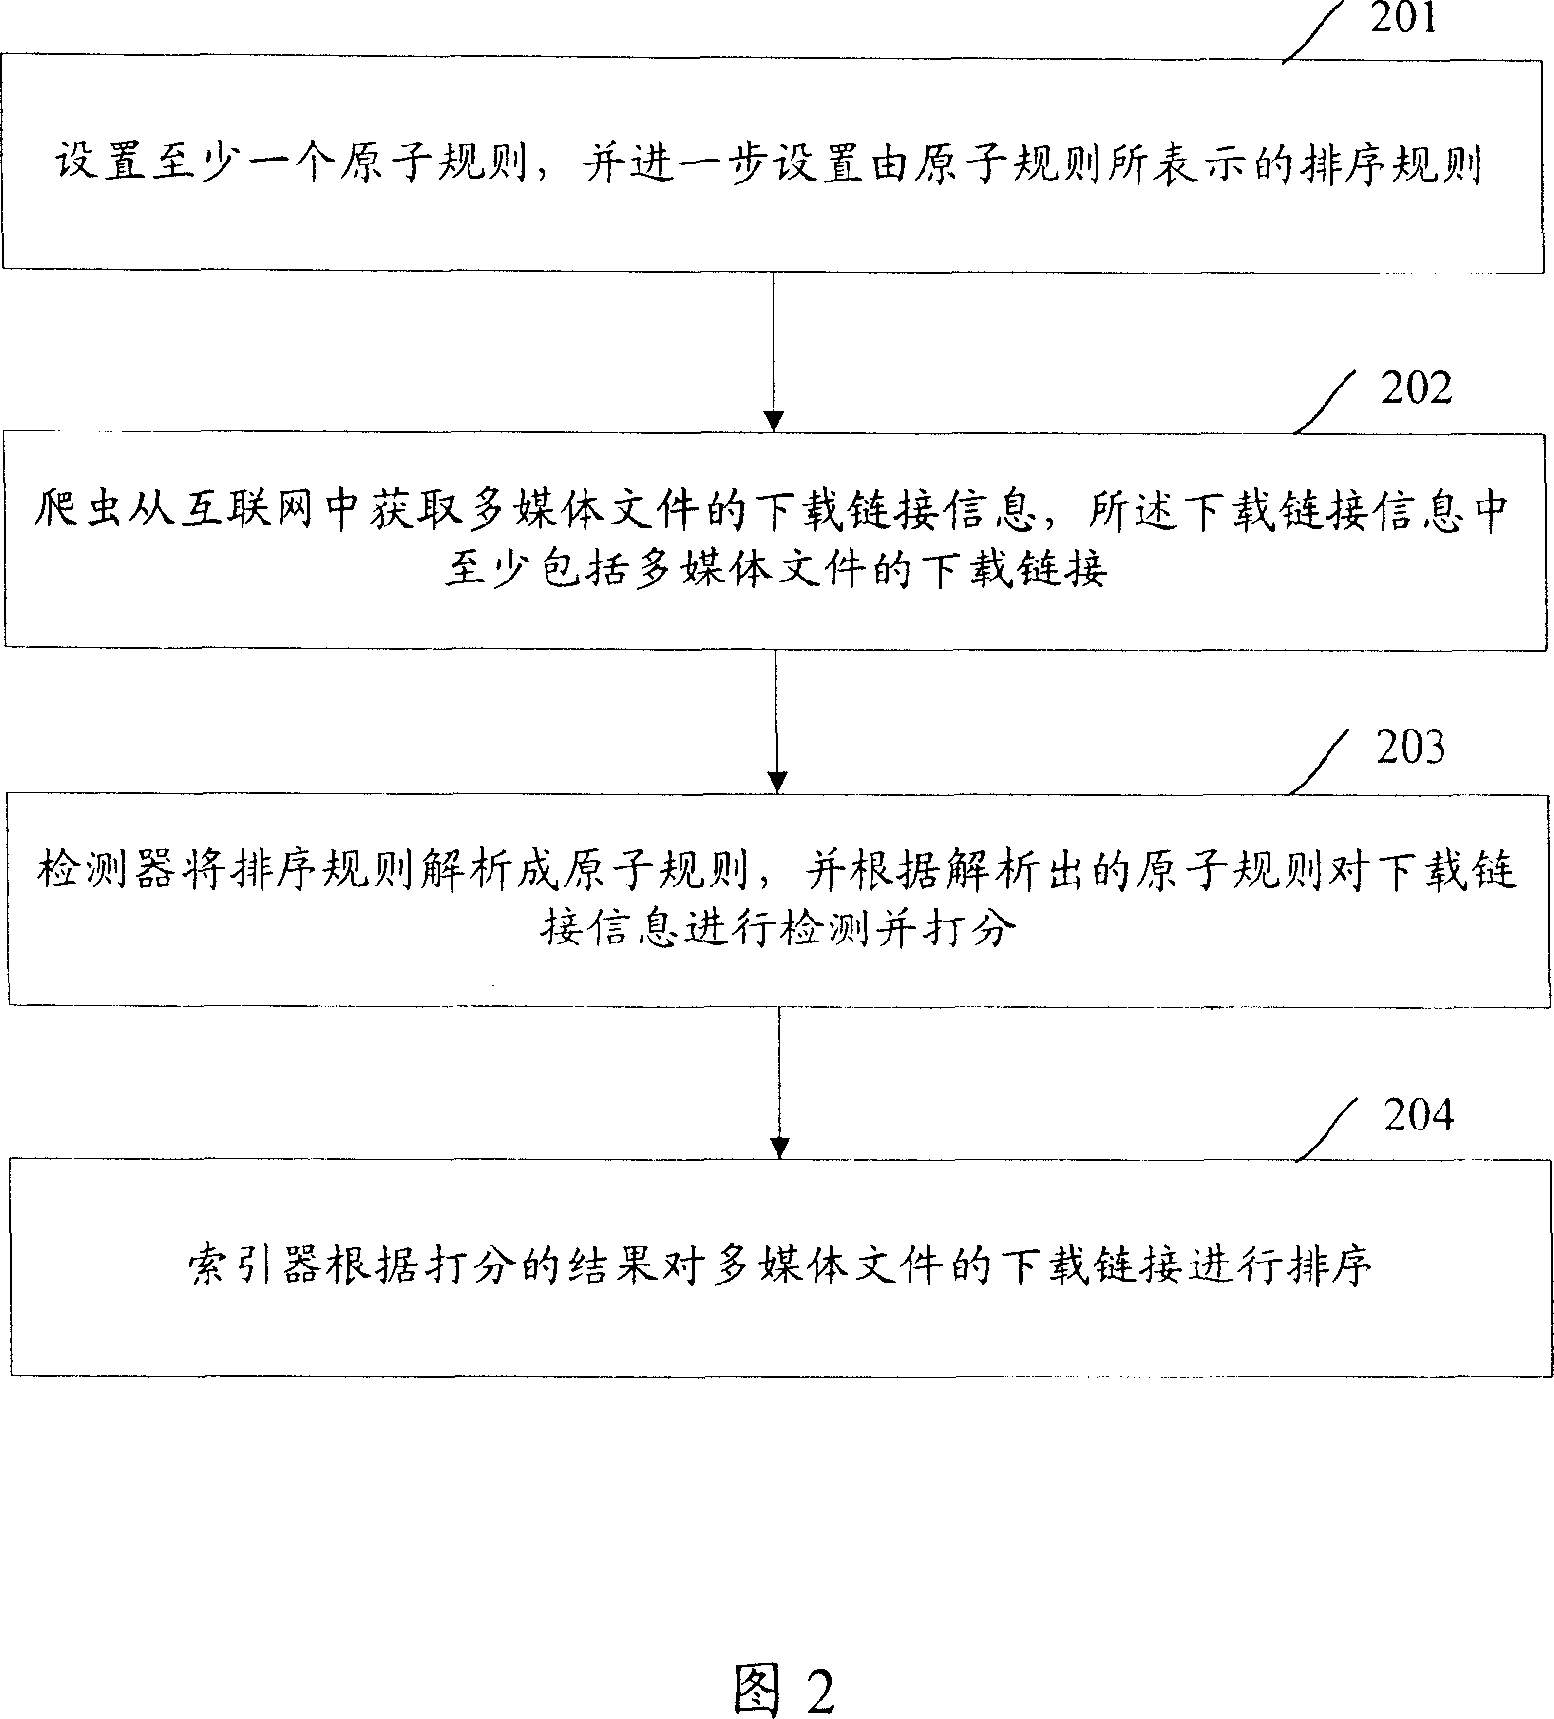 Method for sequencing multi-medium file search engine